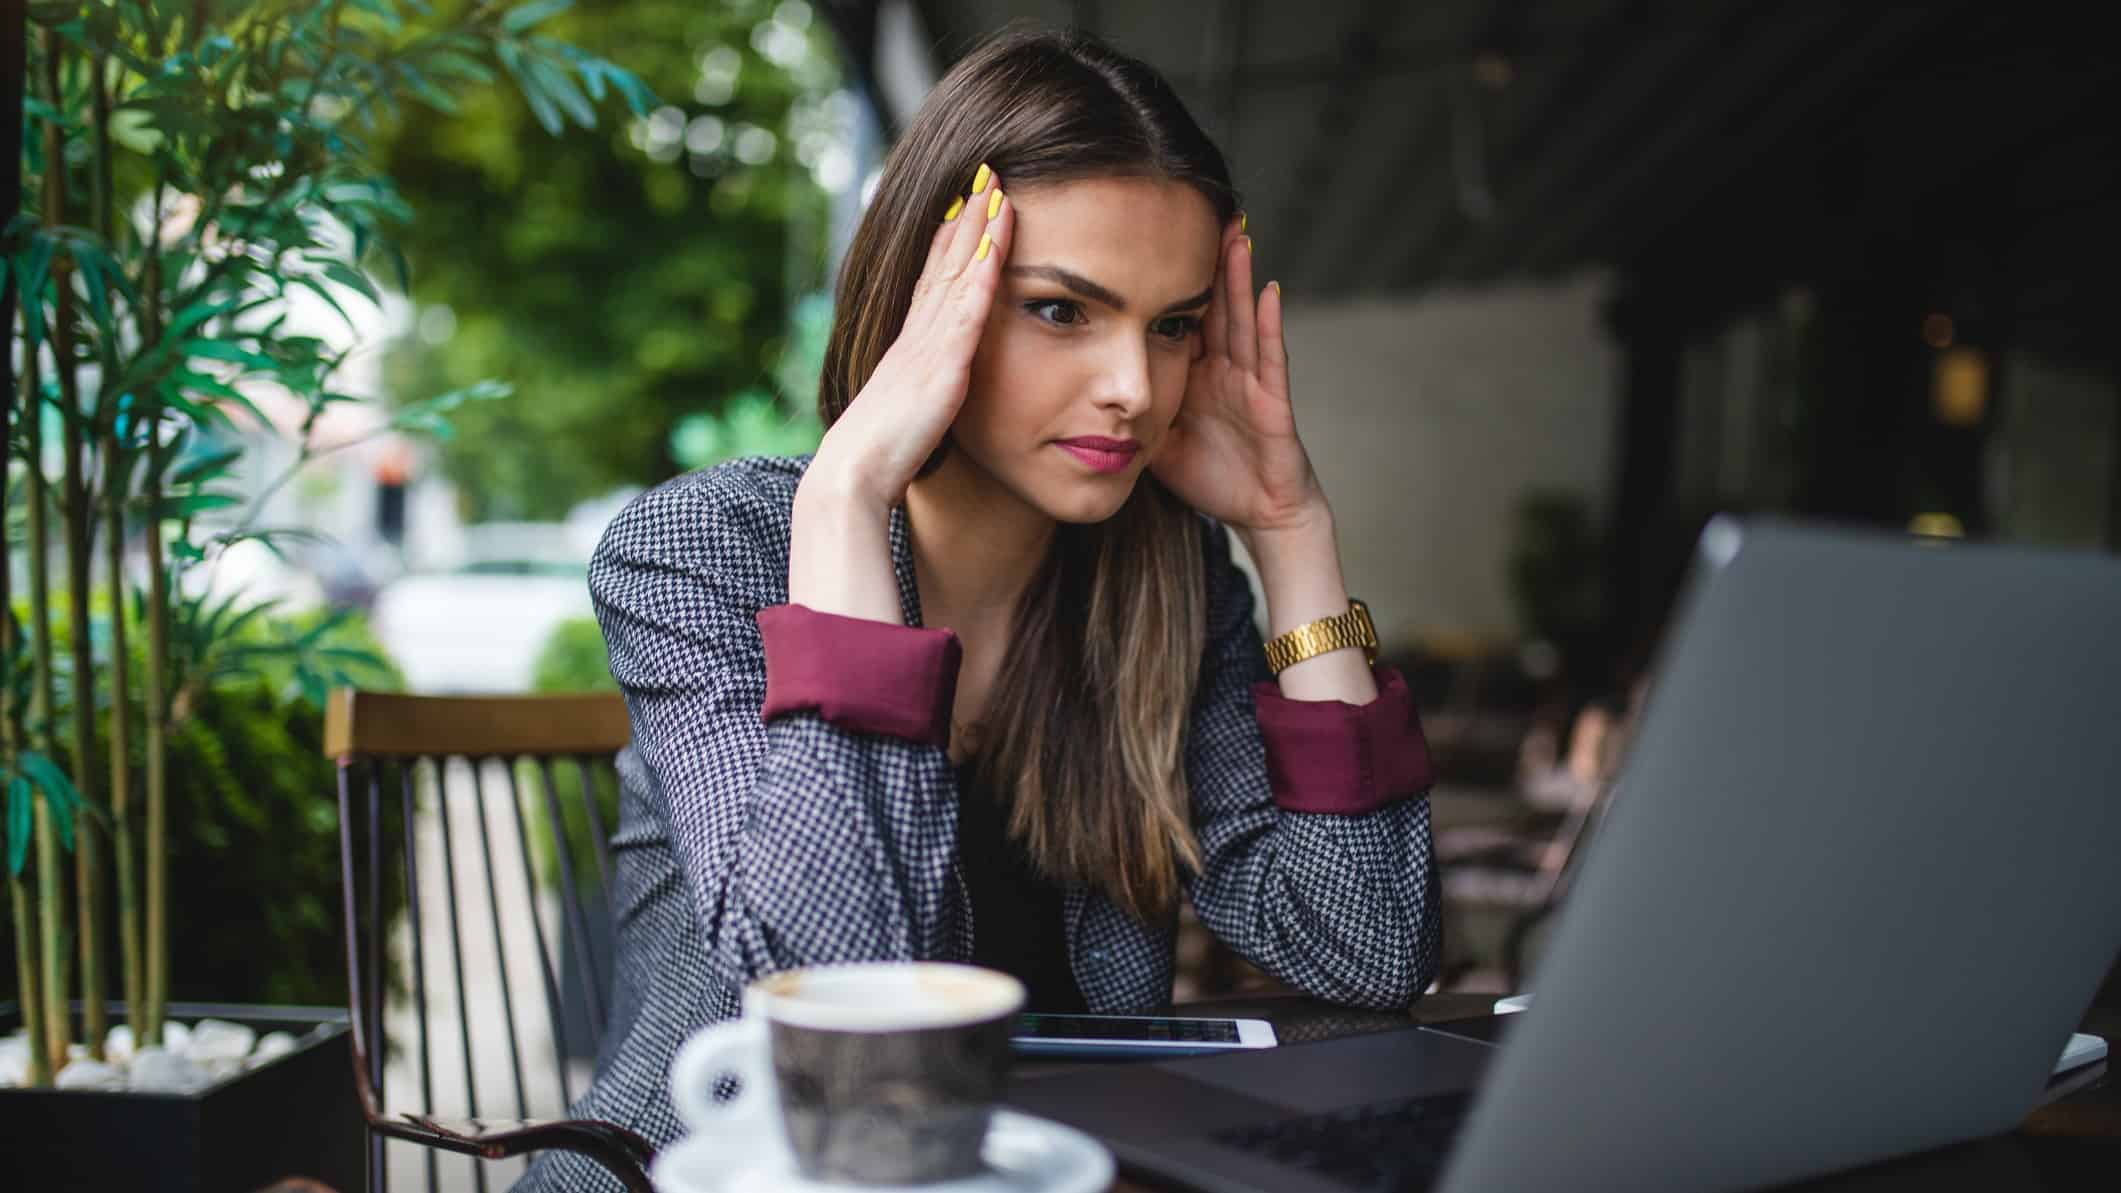 Young woman dressed in suit sitting at cafe staring at laptop screen with hands to her forehead looking tense